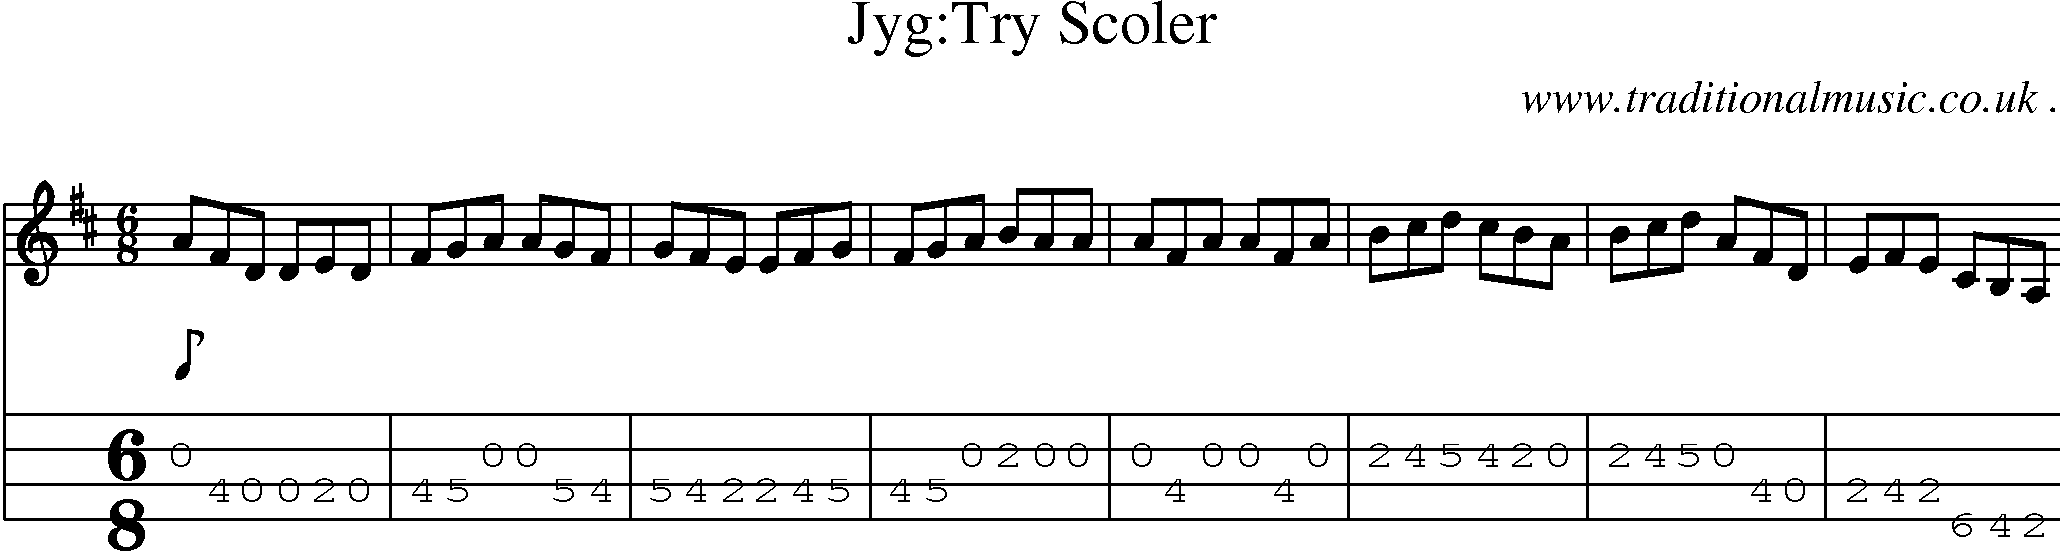 Sheet-Music and Mandolin Tabs for Jygtry Scoler